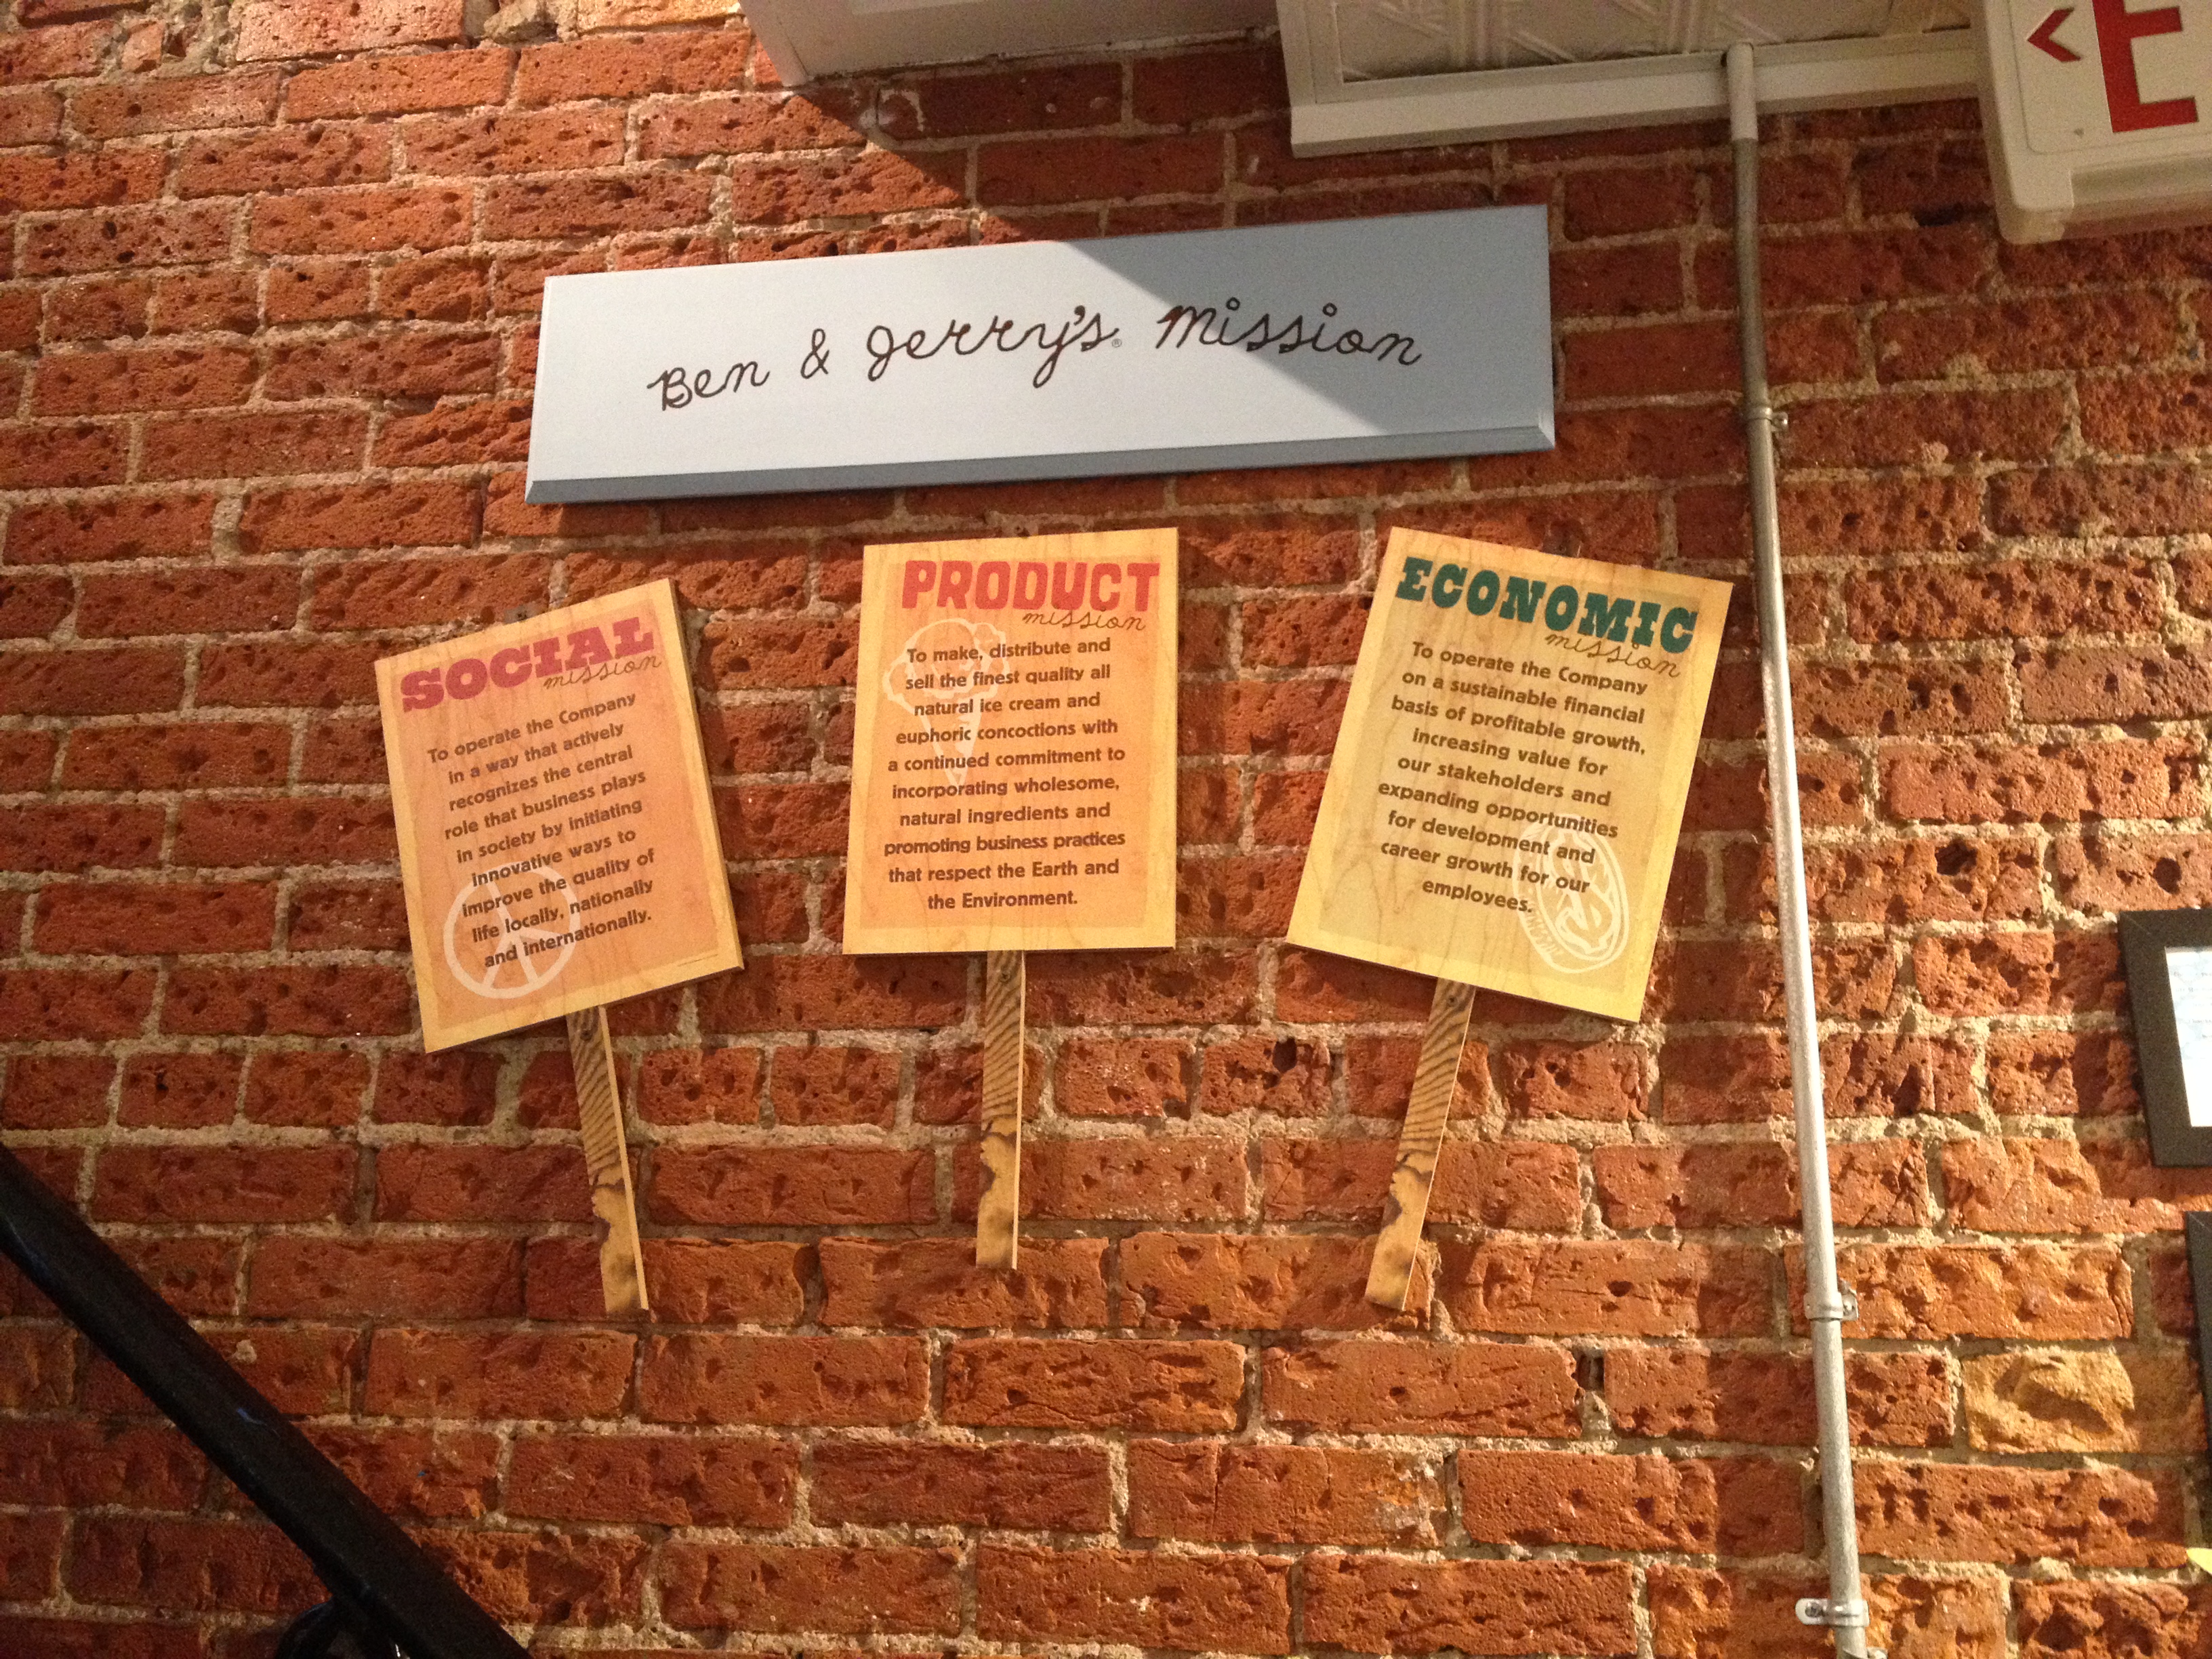 Ben & Jerry's has their three-part mission posted in their shop. | Photo by Hallie Smith